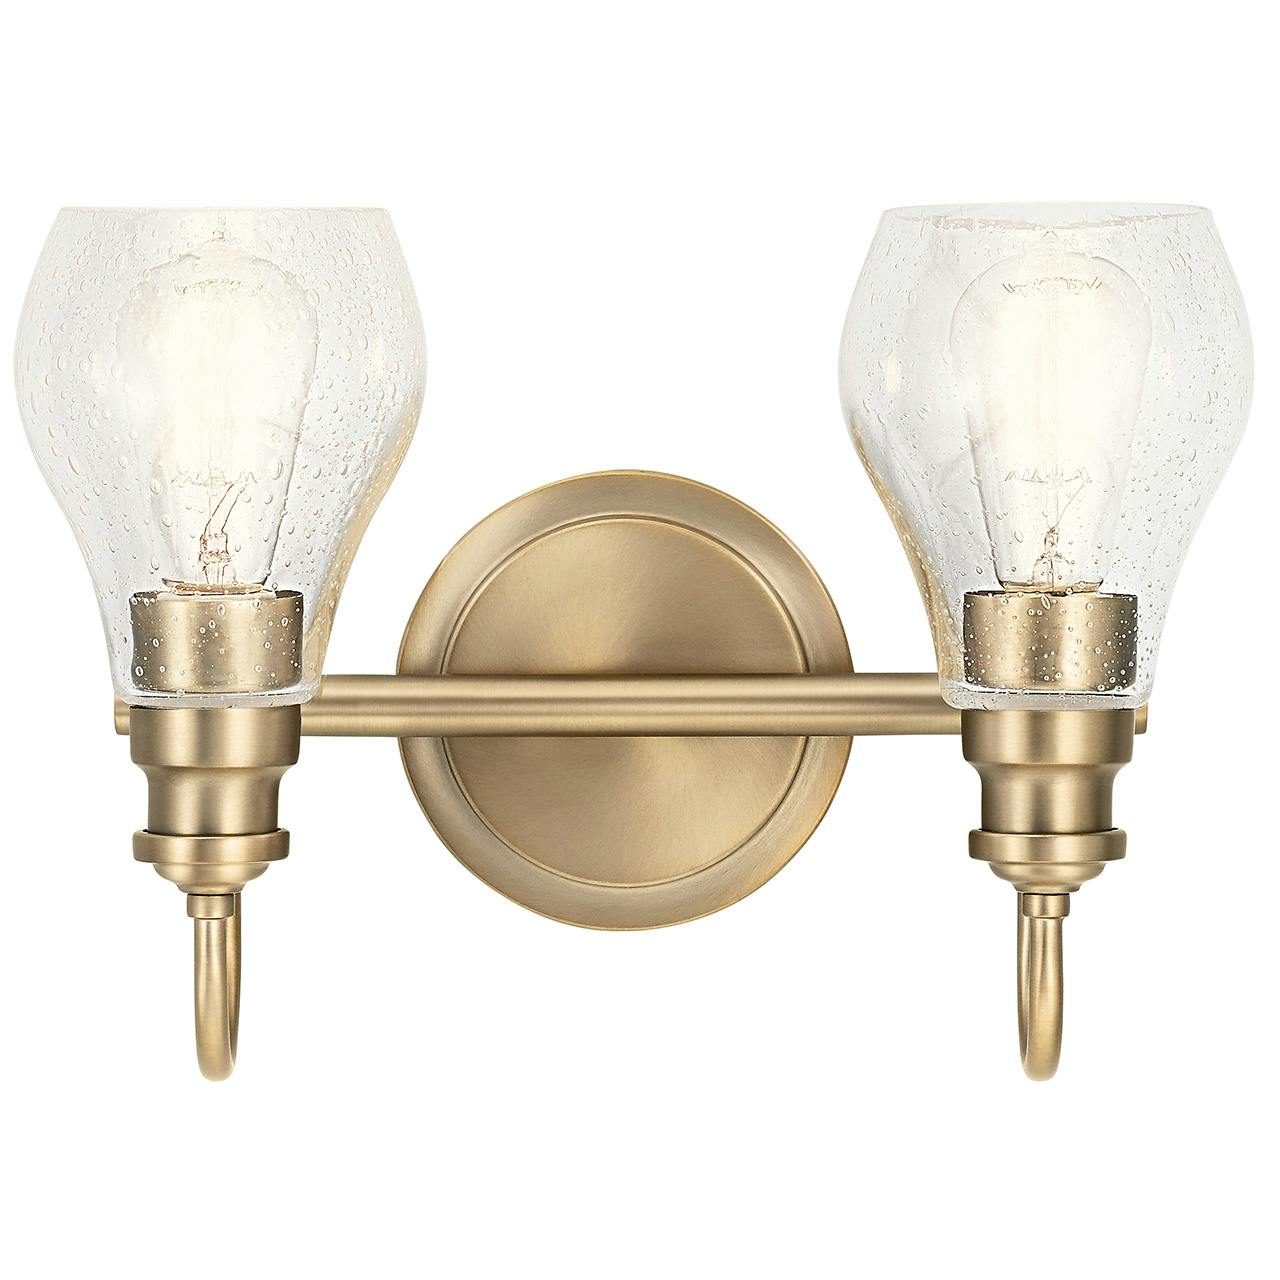 The Greenbrier 2 Light Vanity Light Bronze facing up on a white background